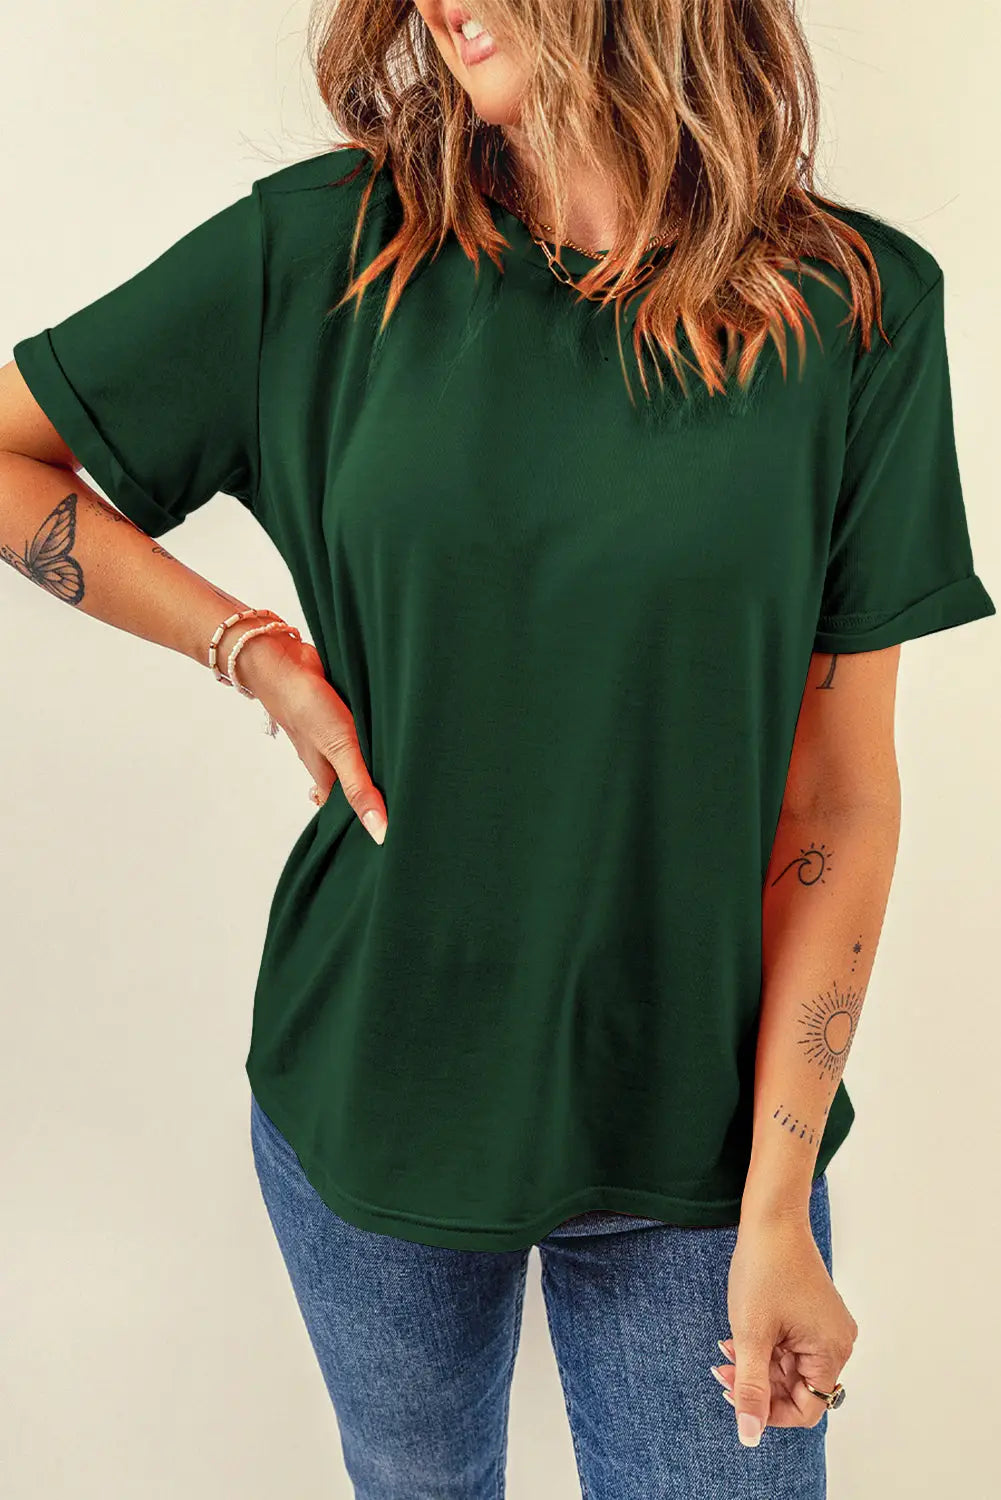 Red casual plain crew neck tee - green / 2xl / 62% polyester + 32% cotton + 6% elastane - t-shirts